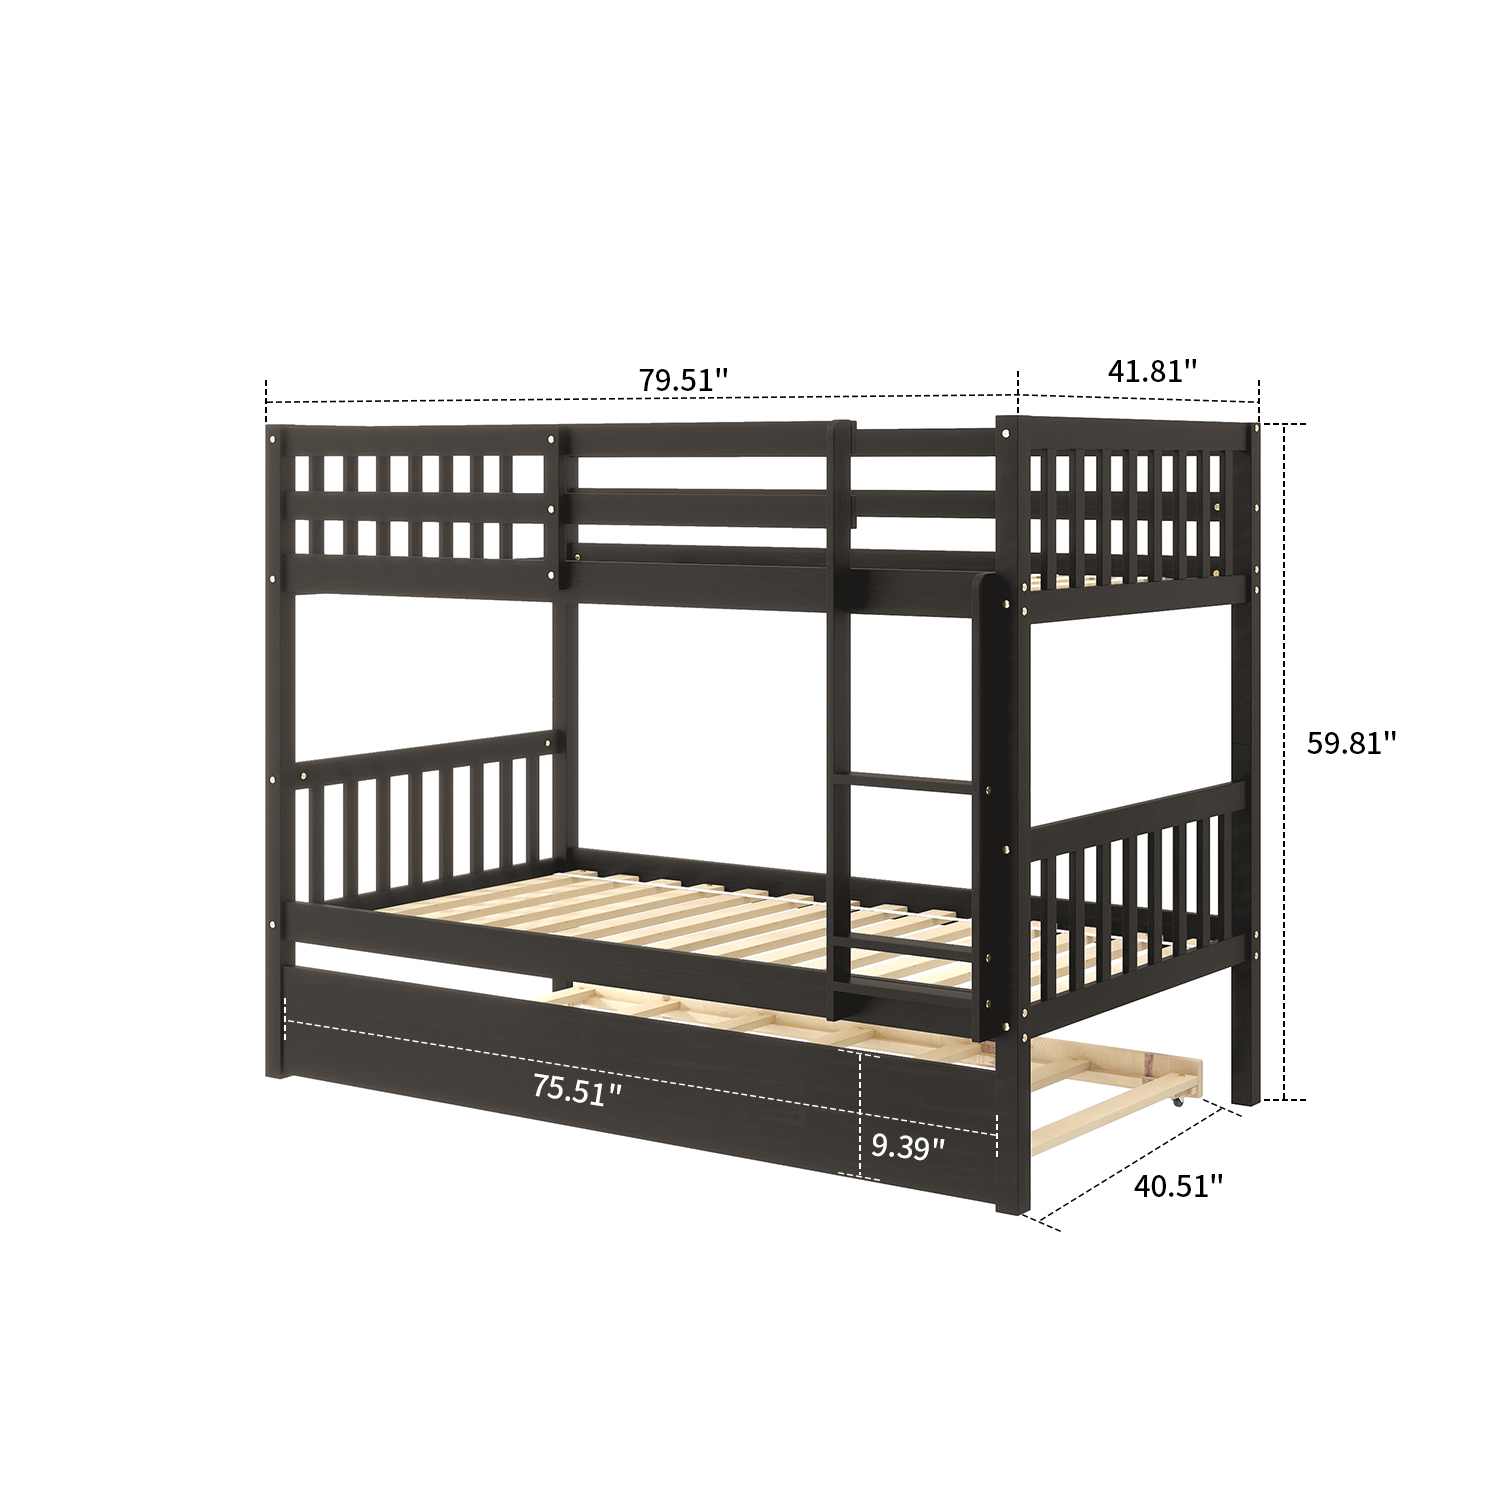 Modern and Minimalist Style Twin Size Wooden Bunk Bed with Ladder and A Trundle, Espresso - image 5 of 5